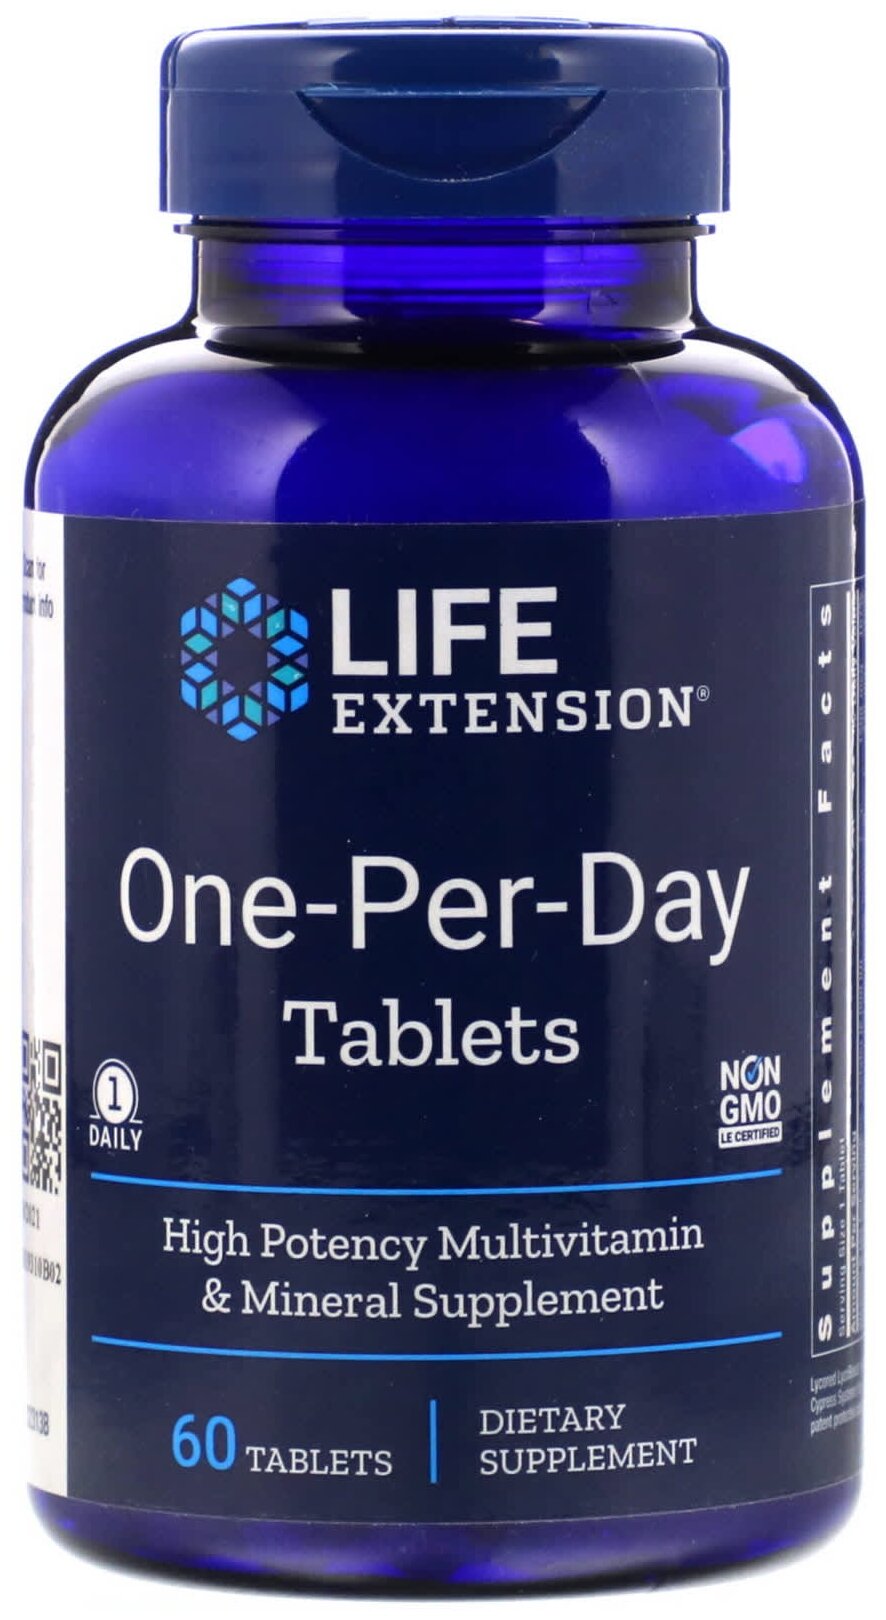 Капсулы Life Extension One-Per-Day Multivitamin, 300 мл, 60 шт.